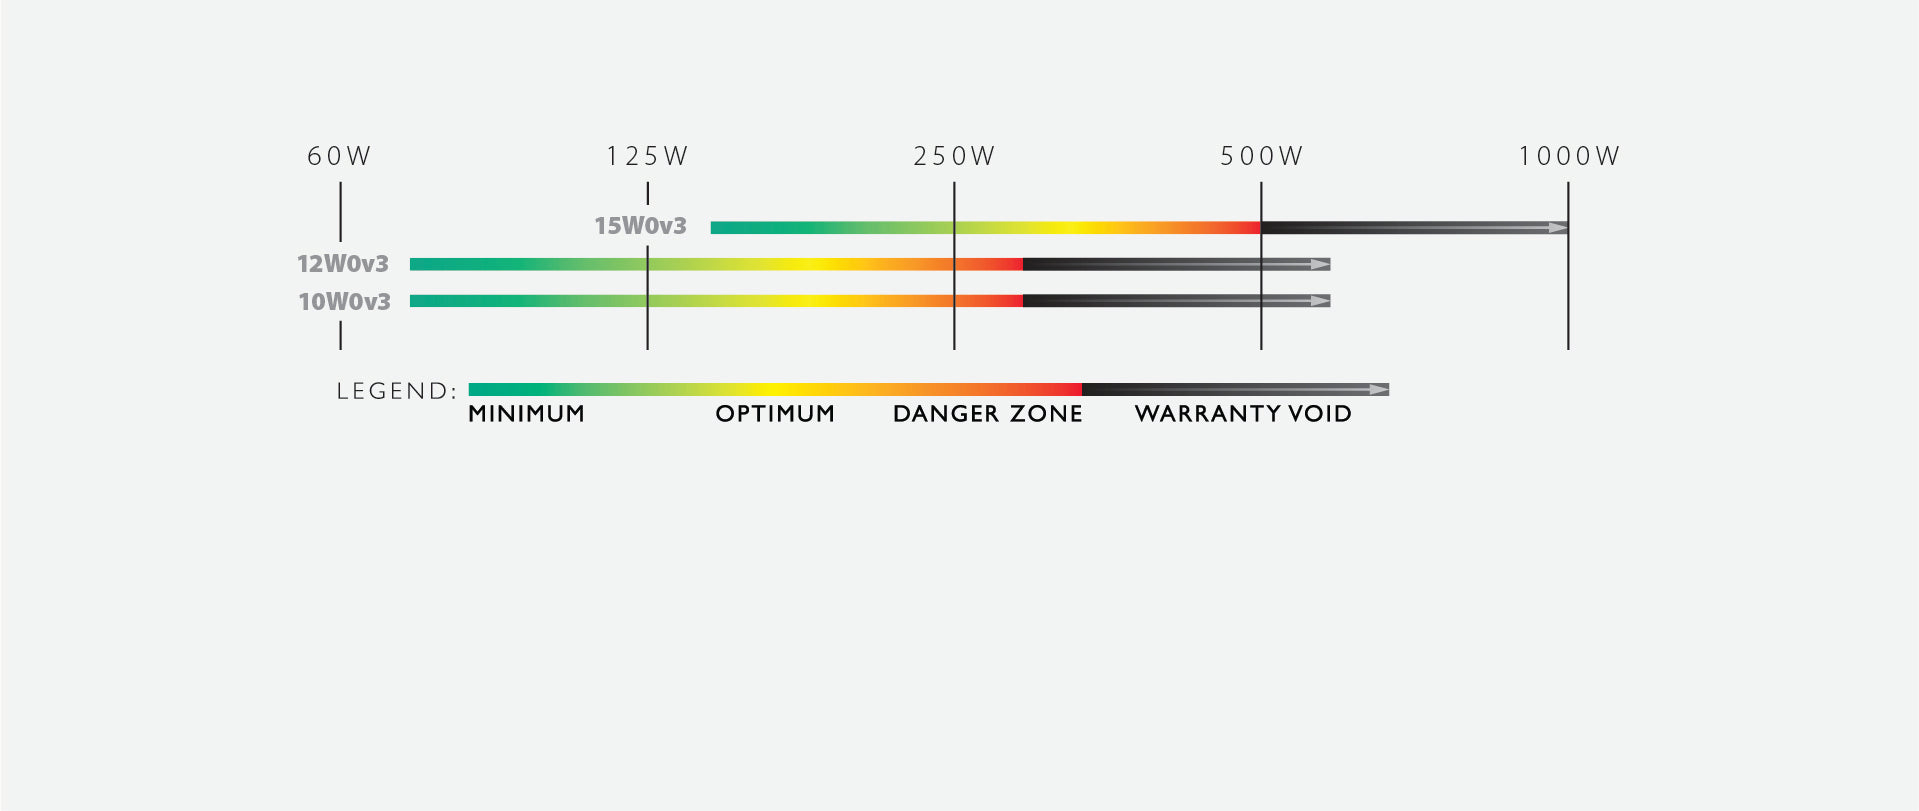 A chart showing the wattage power of a 10, 12 and 15 inch W0v3 subwoofer unit.